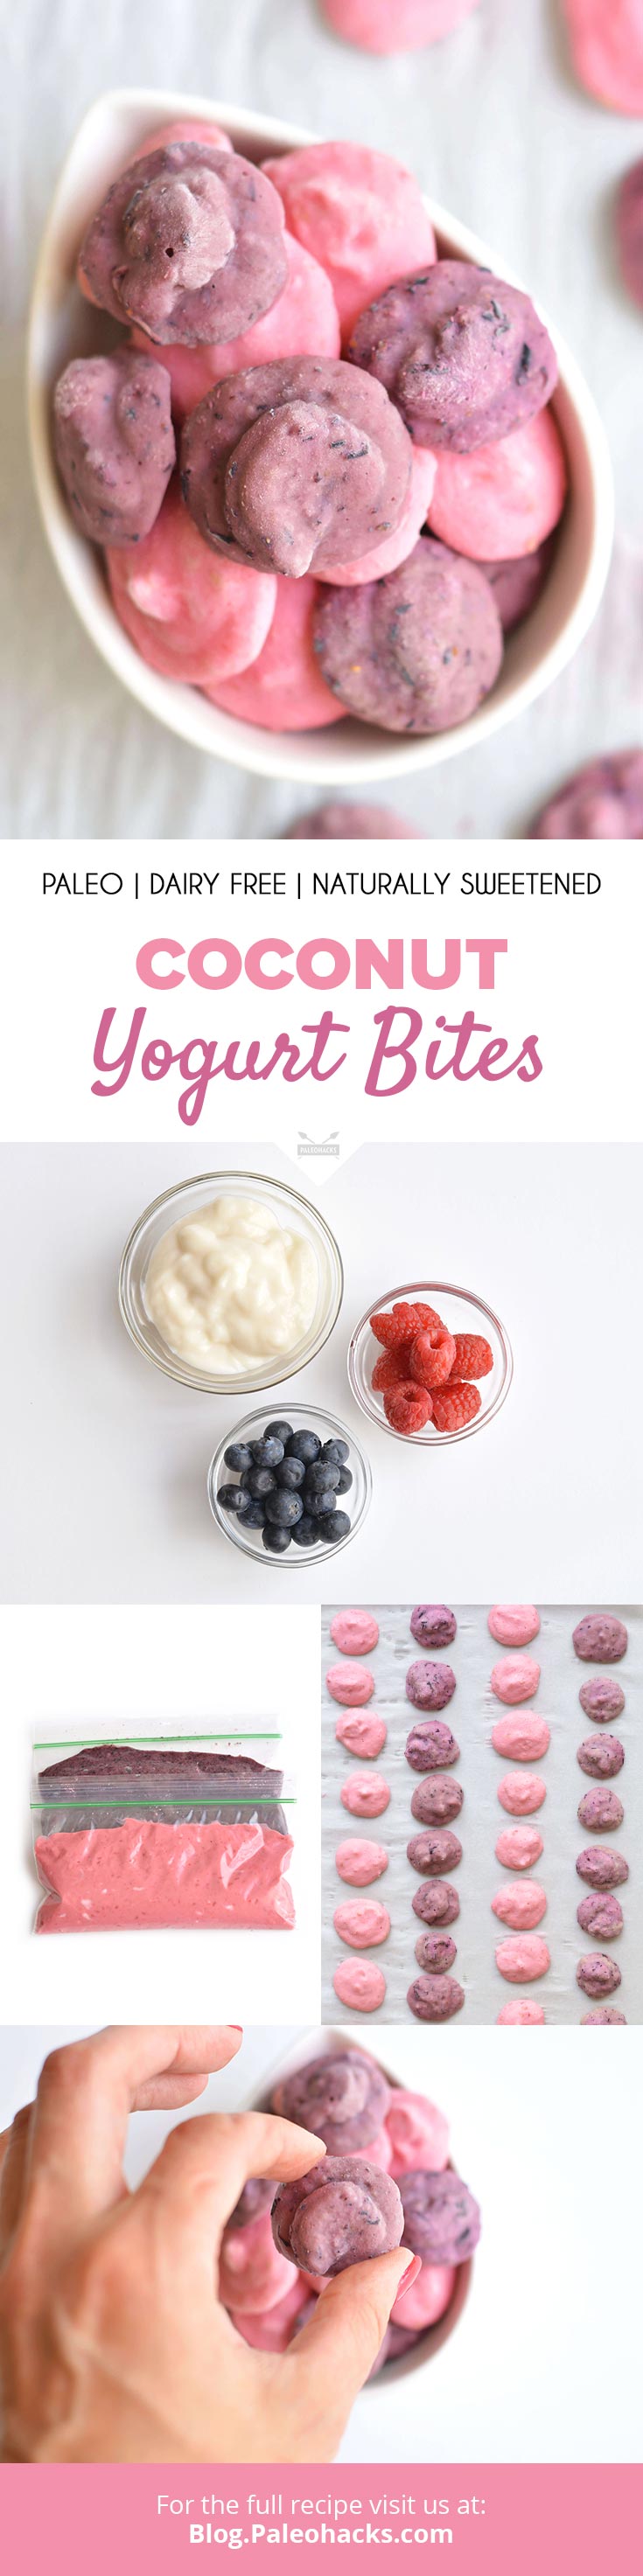 These yogurt bites are made from dairy-free coconut yogurt and fresh, seasonal fruit for a yummy frozen treat. This recipe uses blueberries and raspberries.